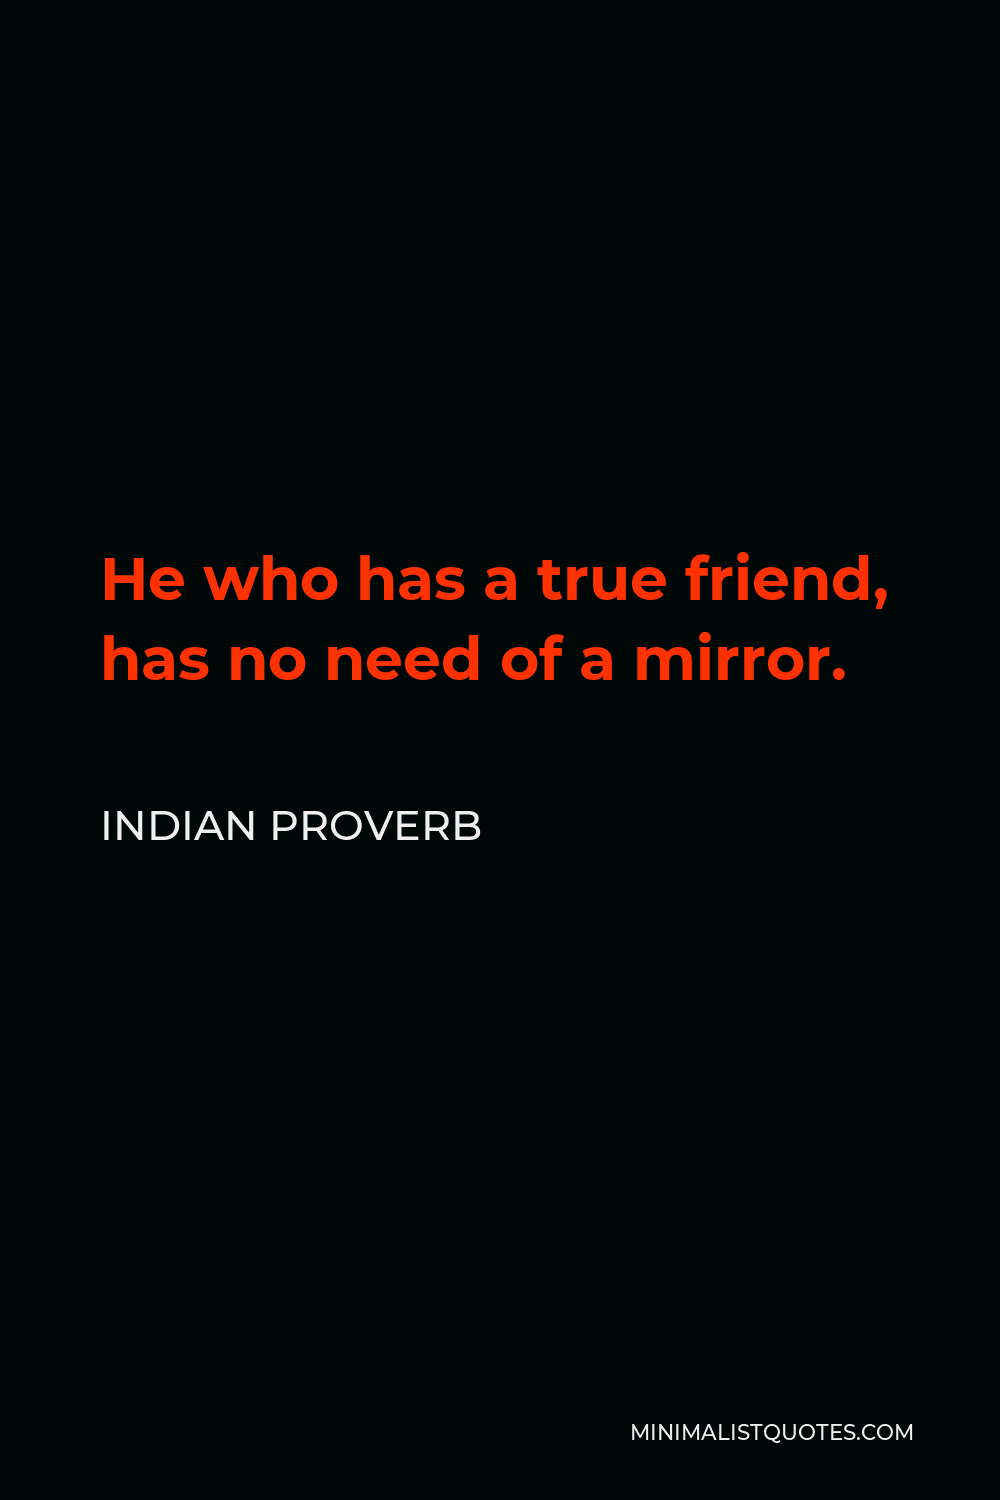 Indian Proverb Quote - He who has a true friend, has no need of a mirror.